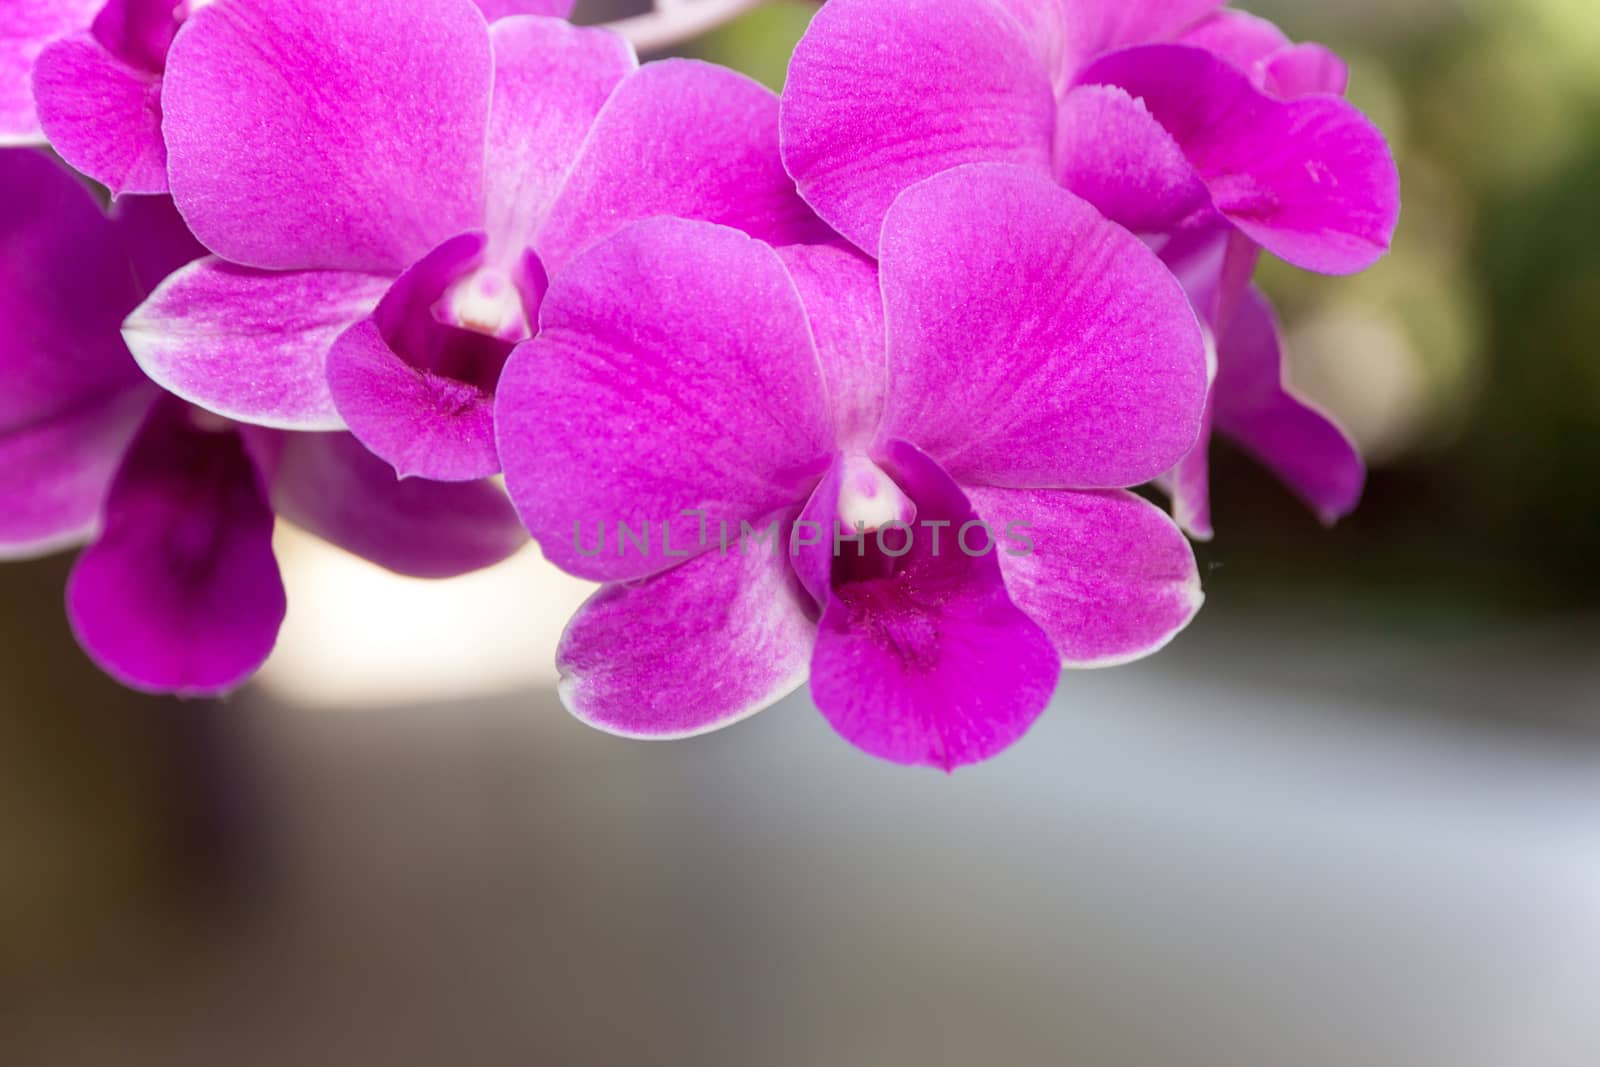 Orchid flowers violet color on the background blurred in garden.